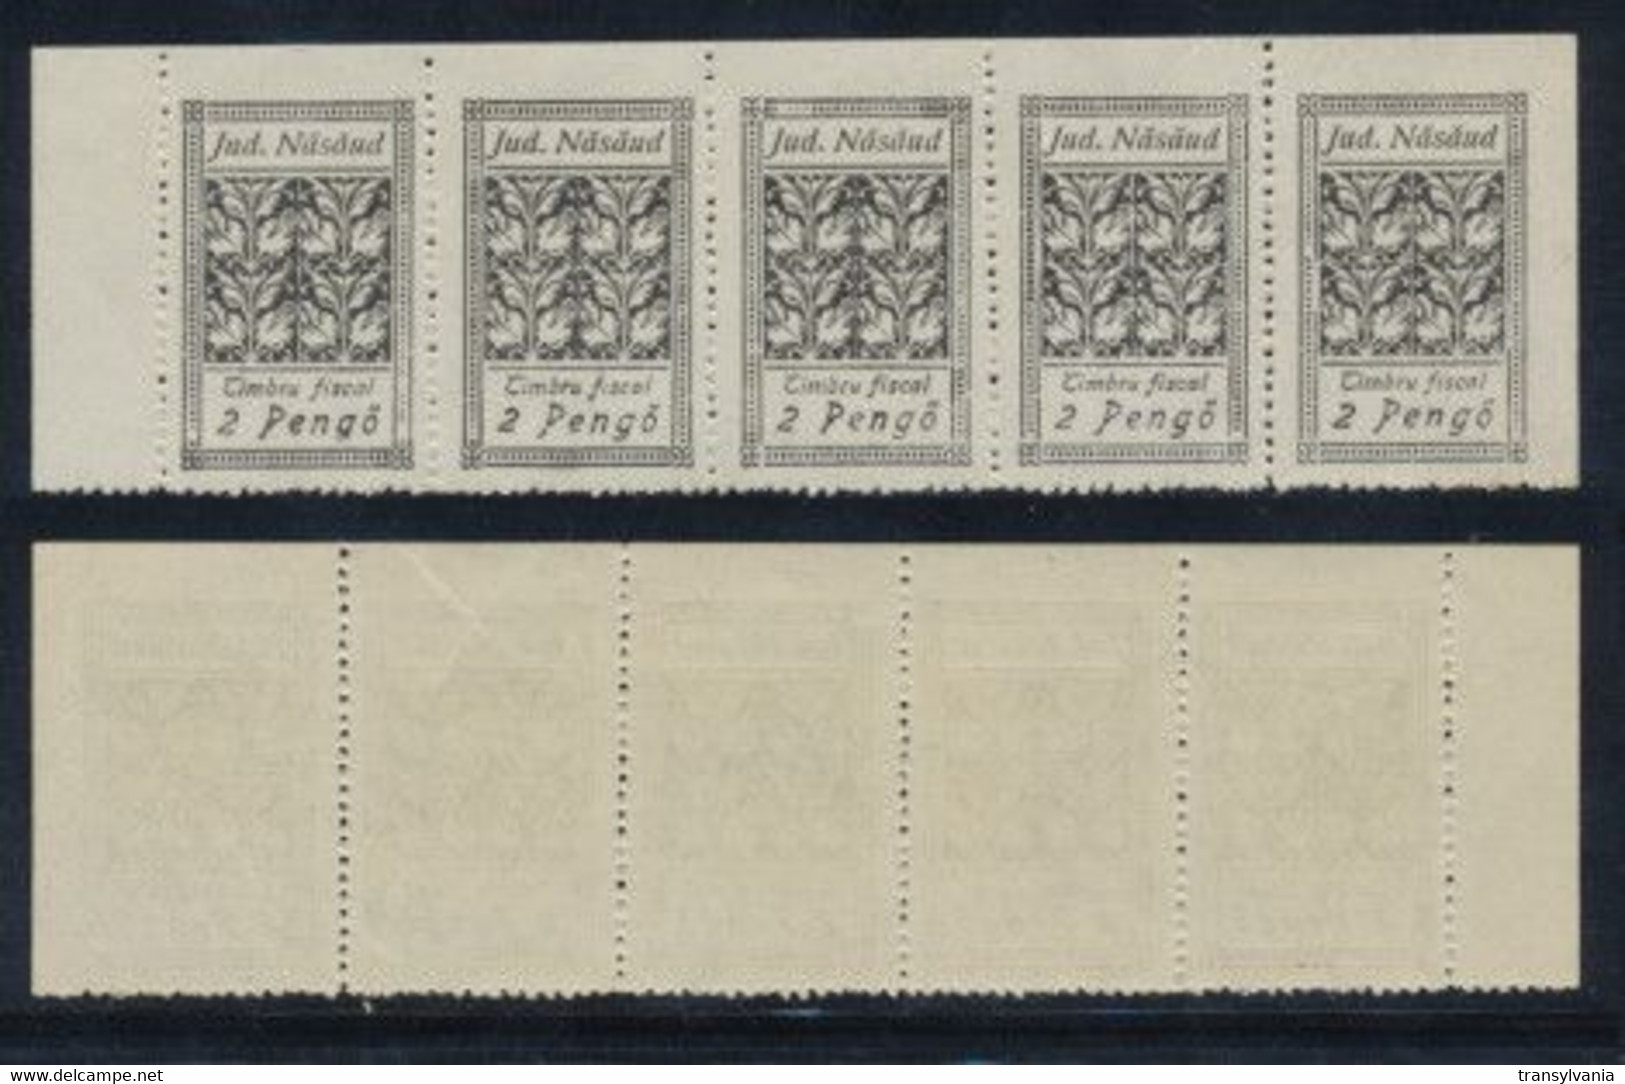 Romania Northern Transylvania 1945 Nasaud Local Revenue 2 Pengo MNH Stamps In Horizontal Strip Of 5. RR! - Fiscales